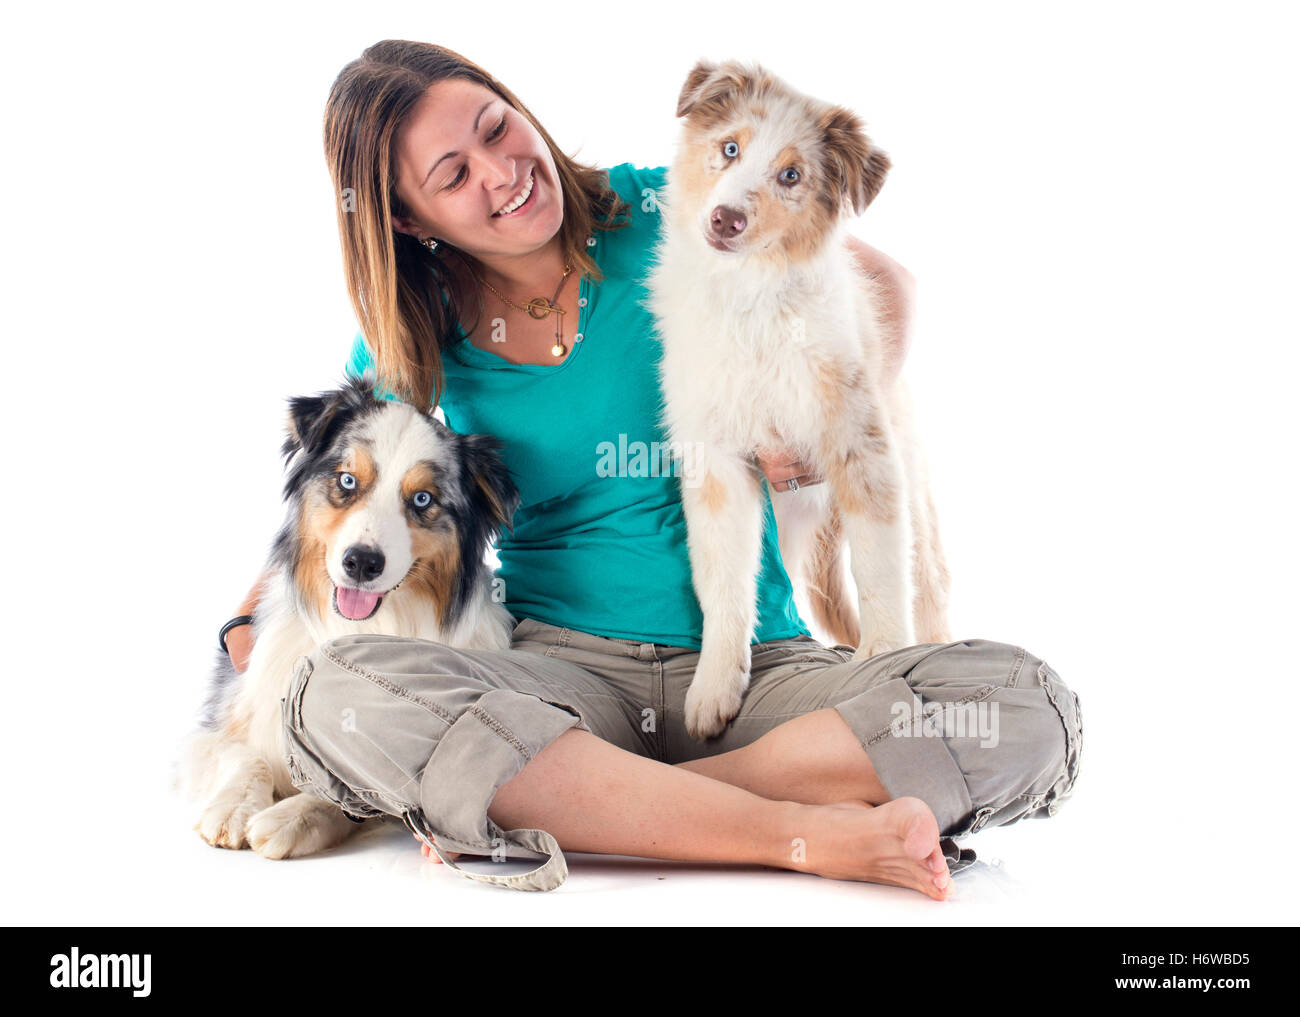 woman dog puppy girl girls blue laugh laughs laughing twit giggle smile smiling laughter laughingly smilingly smiles brown Stock Photo